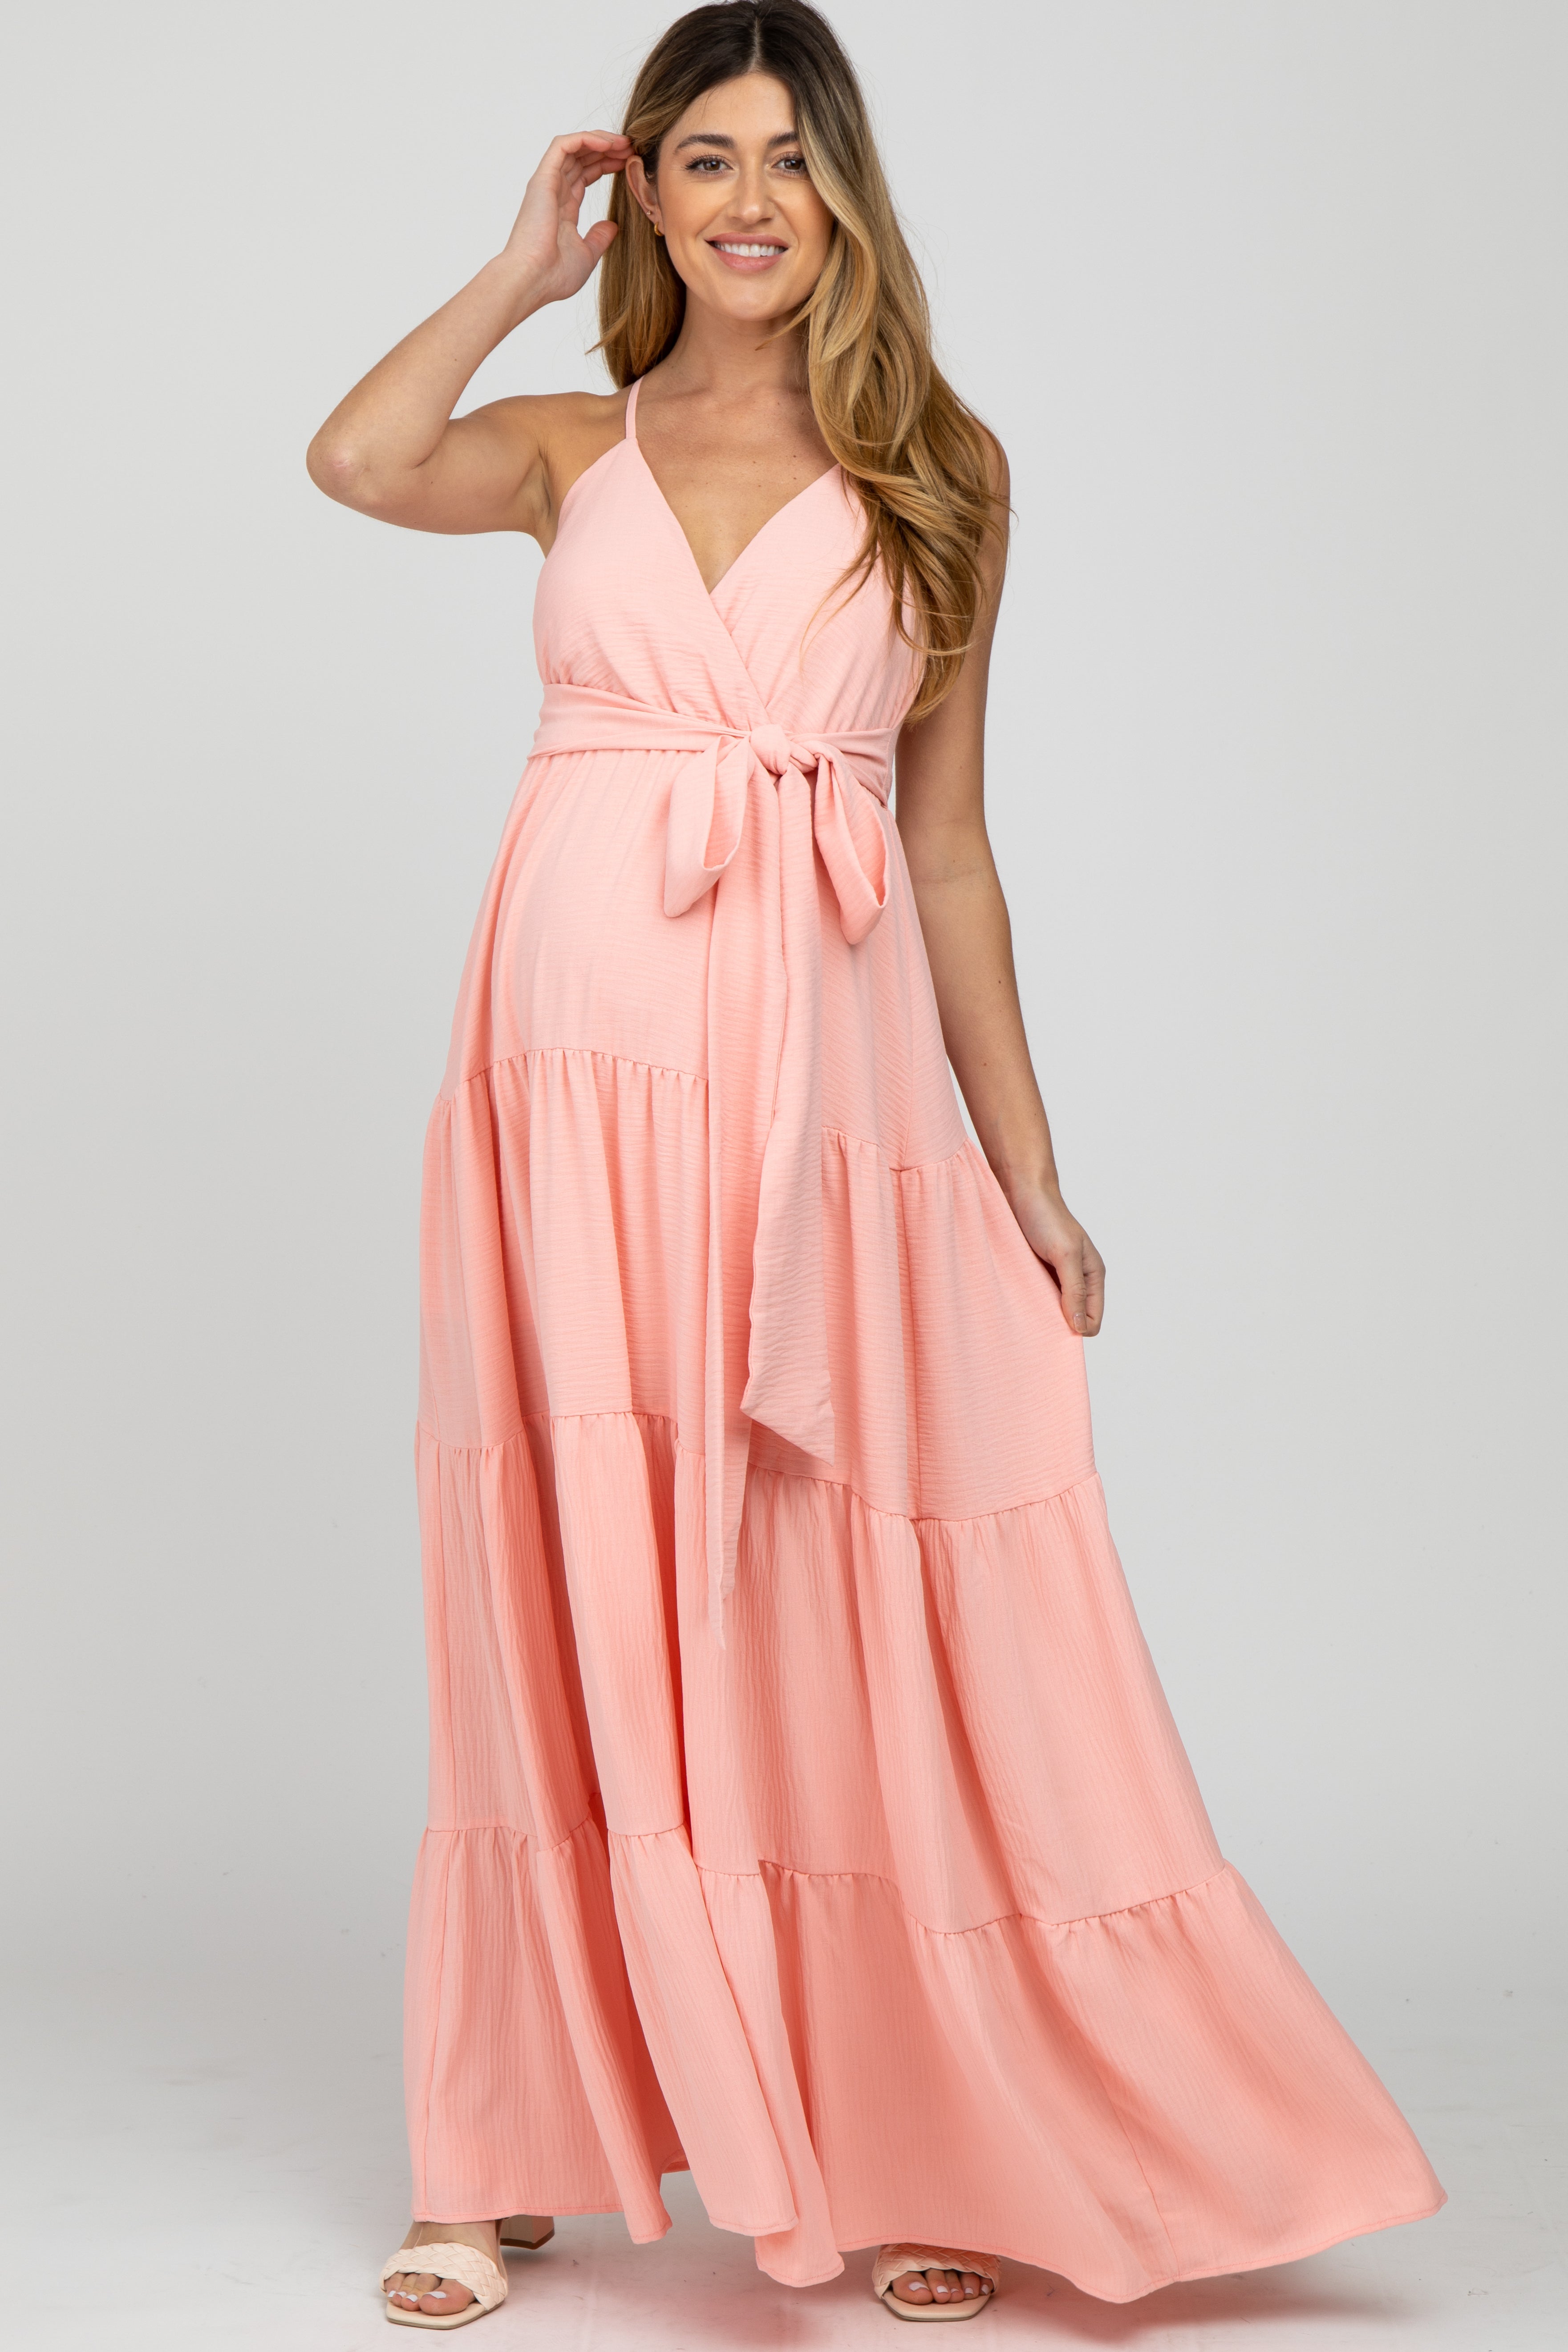 Floral Lace Racerback Maxi Dress - Ready to Wear